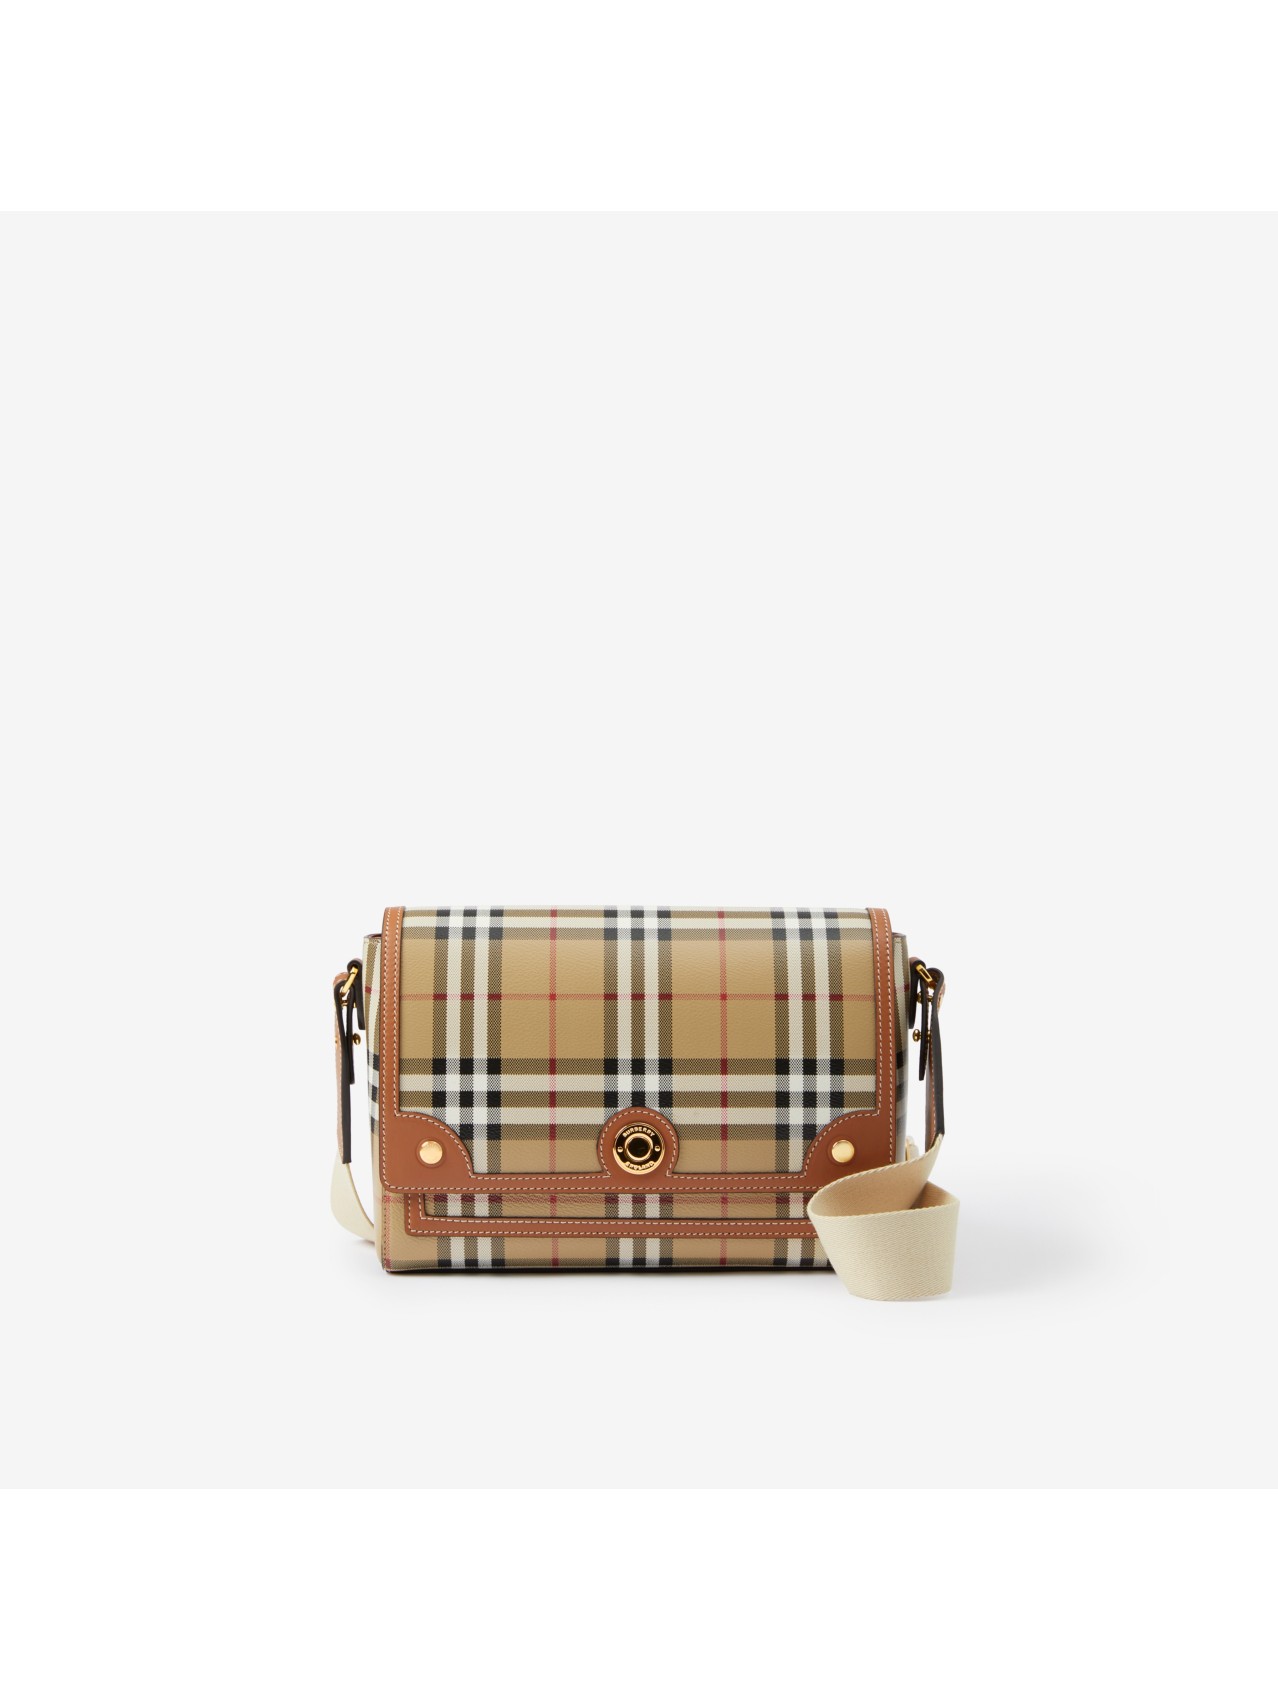 Women's Crossbody Bags | Leather Crossbody Bags | Burberry® Official